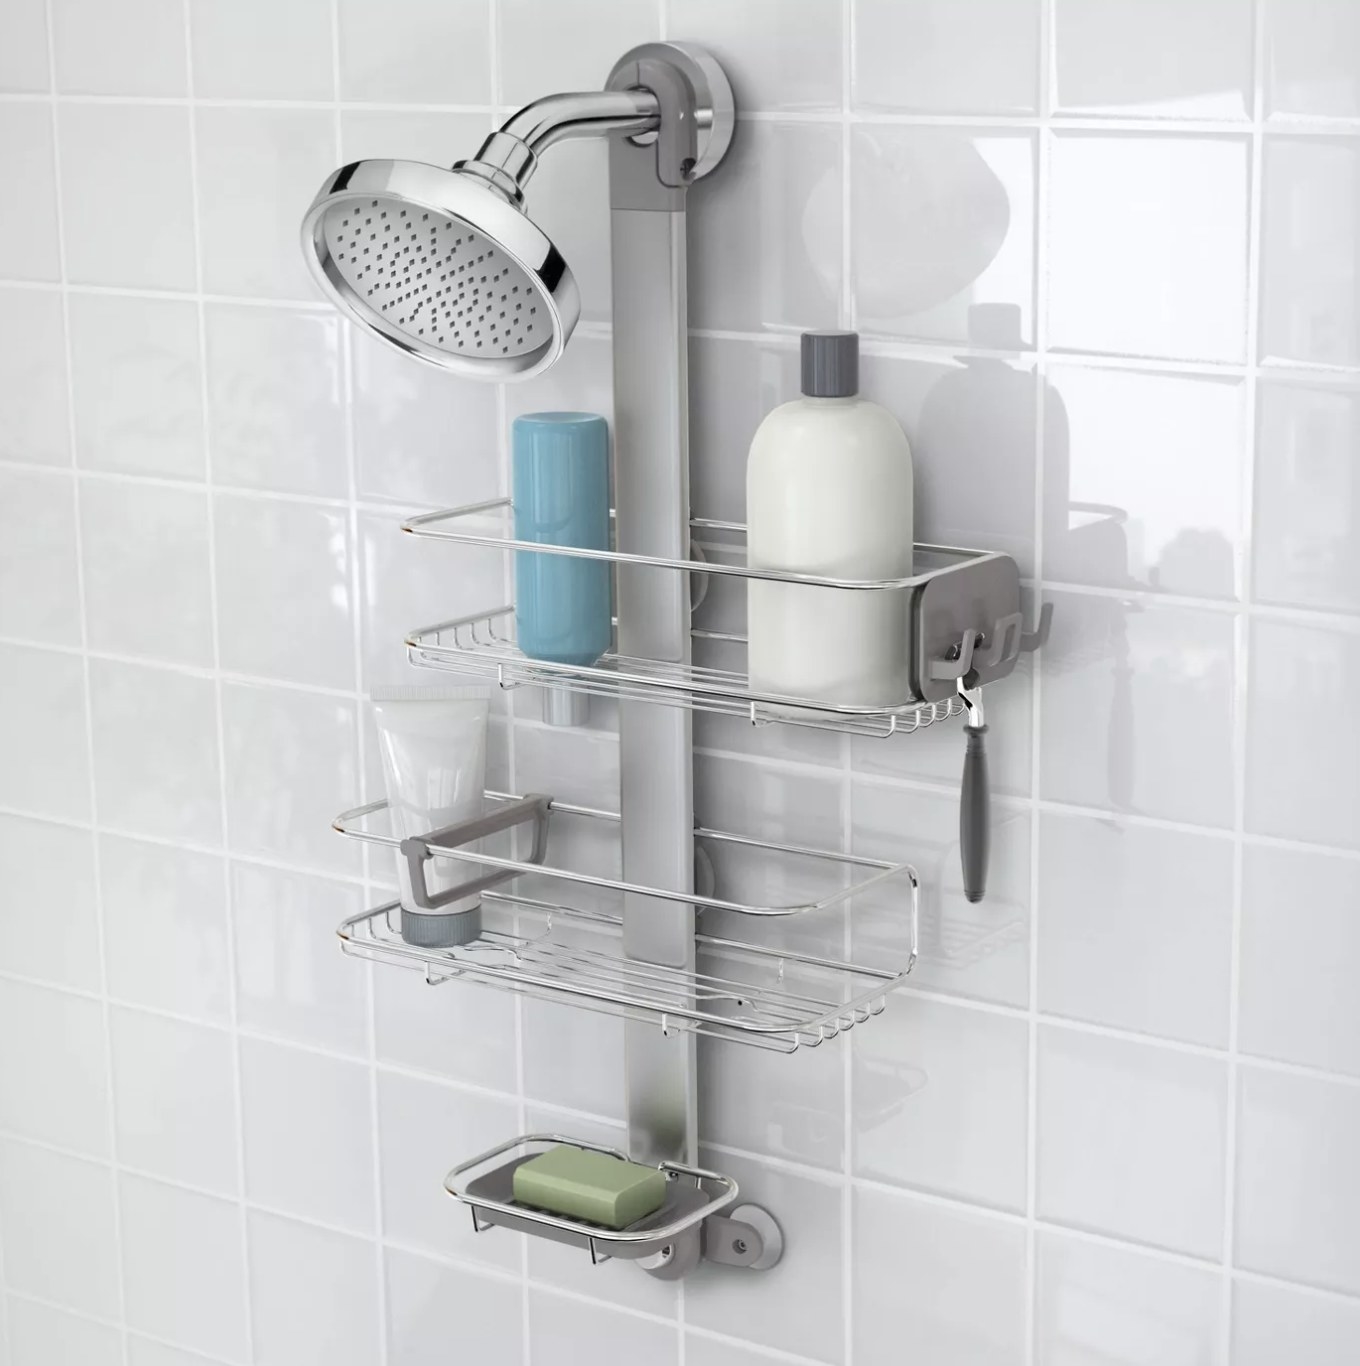 A 3-tier shower caddy attached to the shower head holding three body products, a bar of soap, and a razor